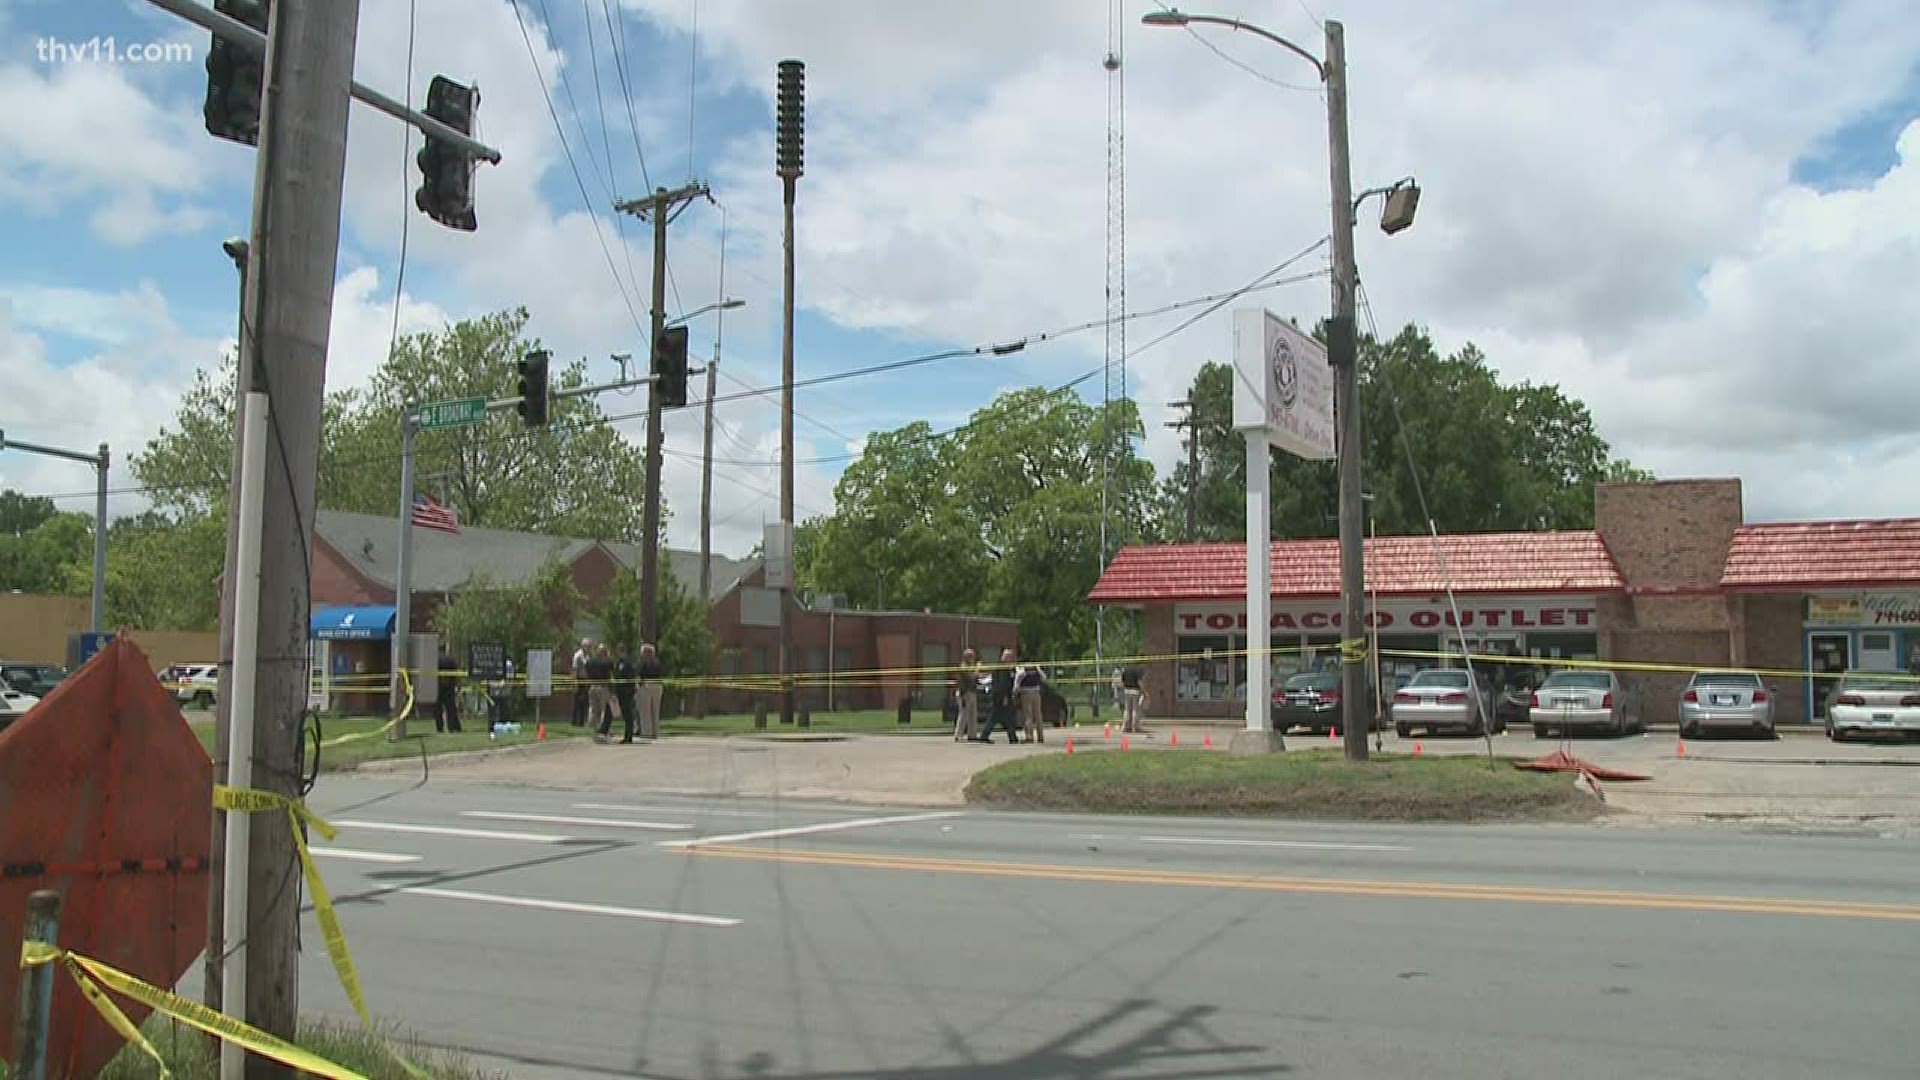 North Little Rock police are investigating after an officer-involved shooting that left one male suspect injured Thursday afternoon.